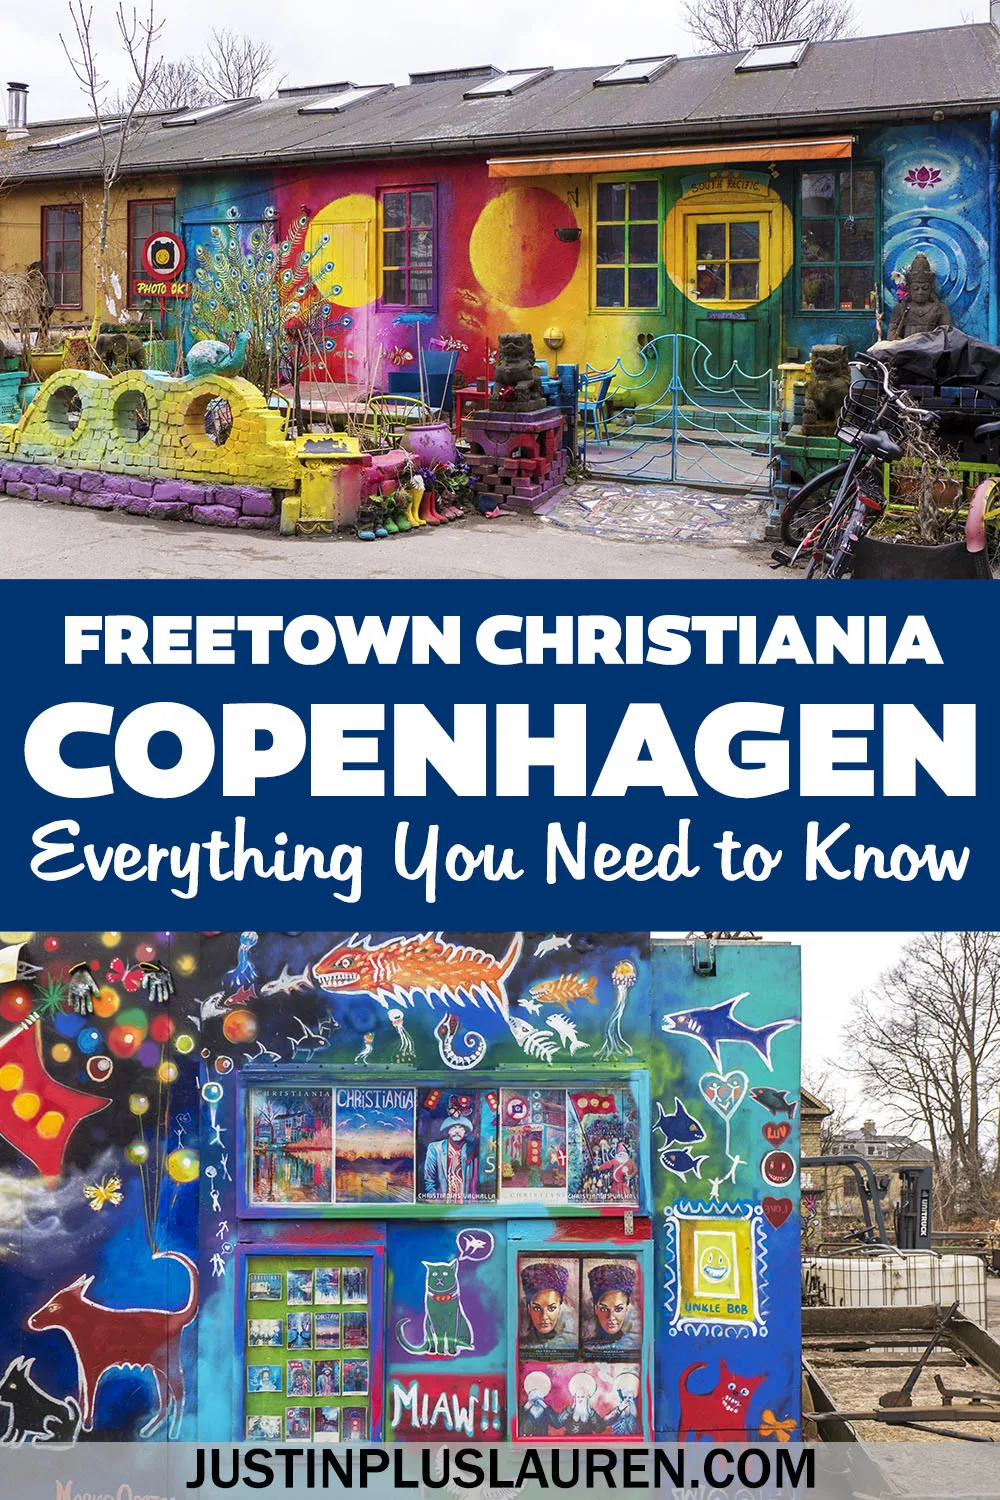 Freetown Christiania Copenhagen is a hippie commune with street art, veg food & an intriguing counterculture. Here's how to plan your visit.